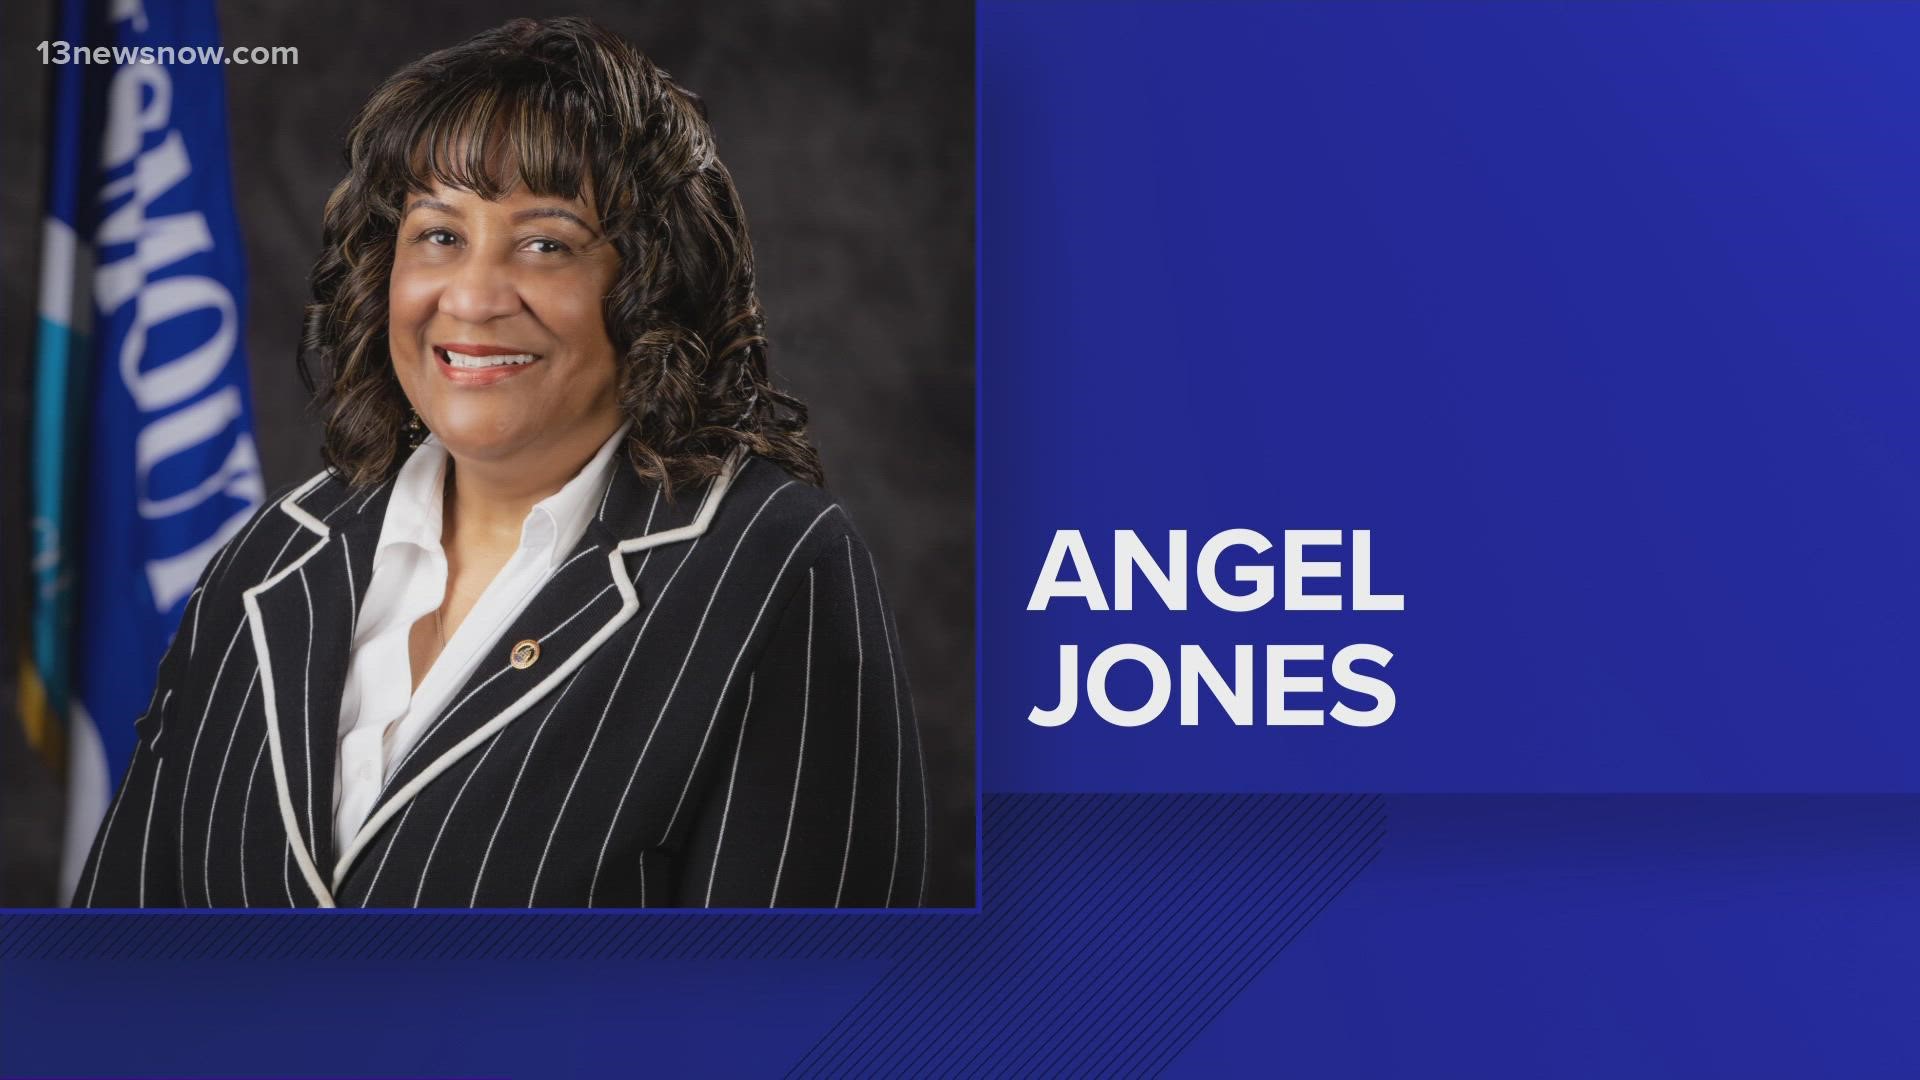 In a meeting Tuesday night, council members fired Jones in a 4-3 vote.